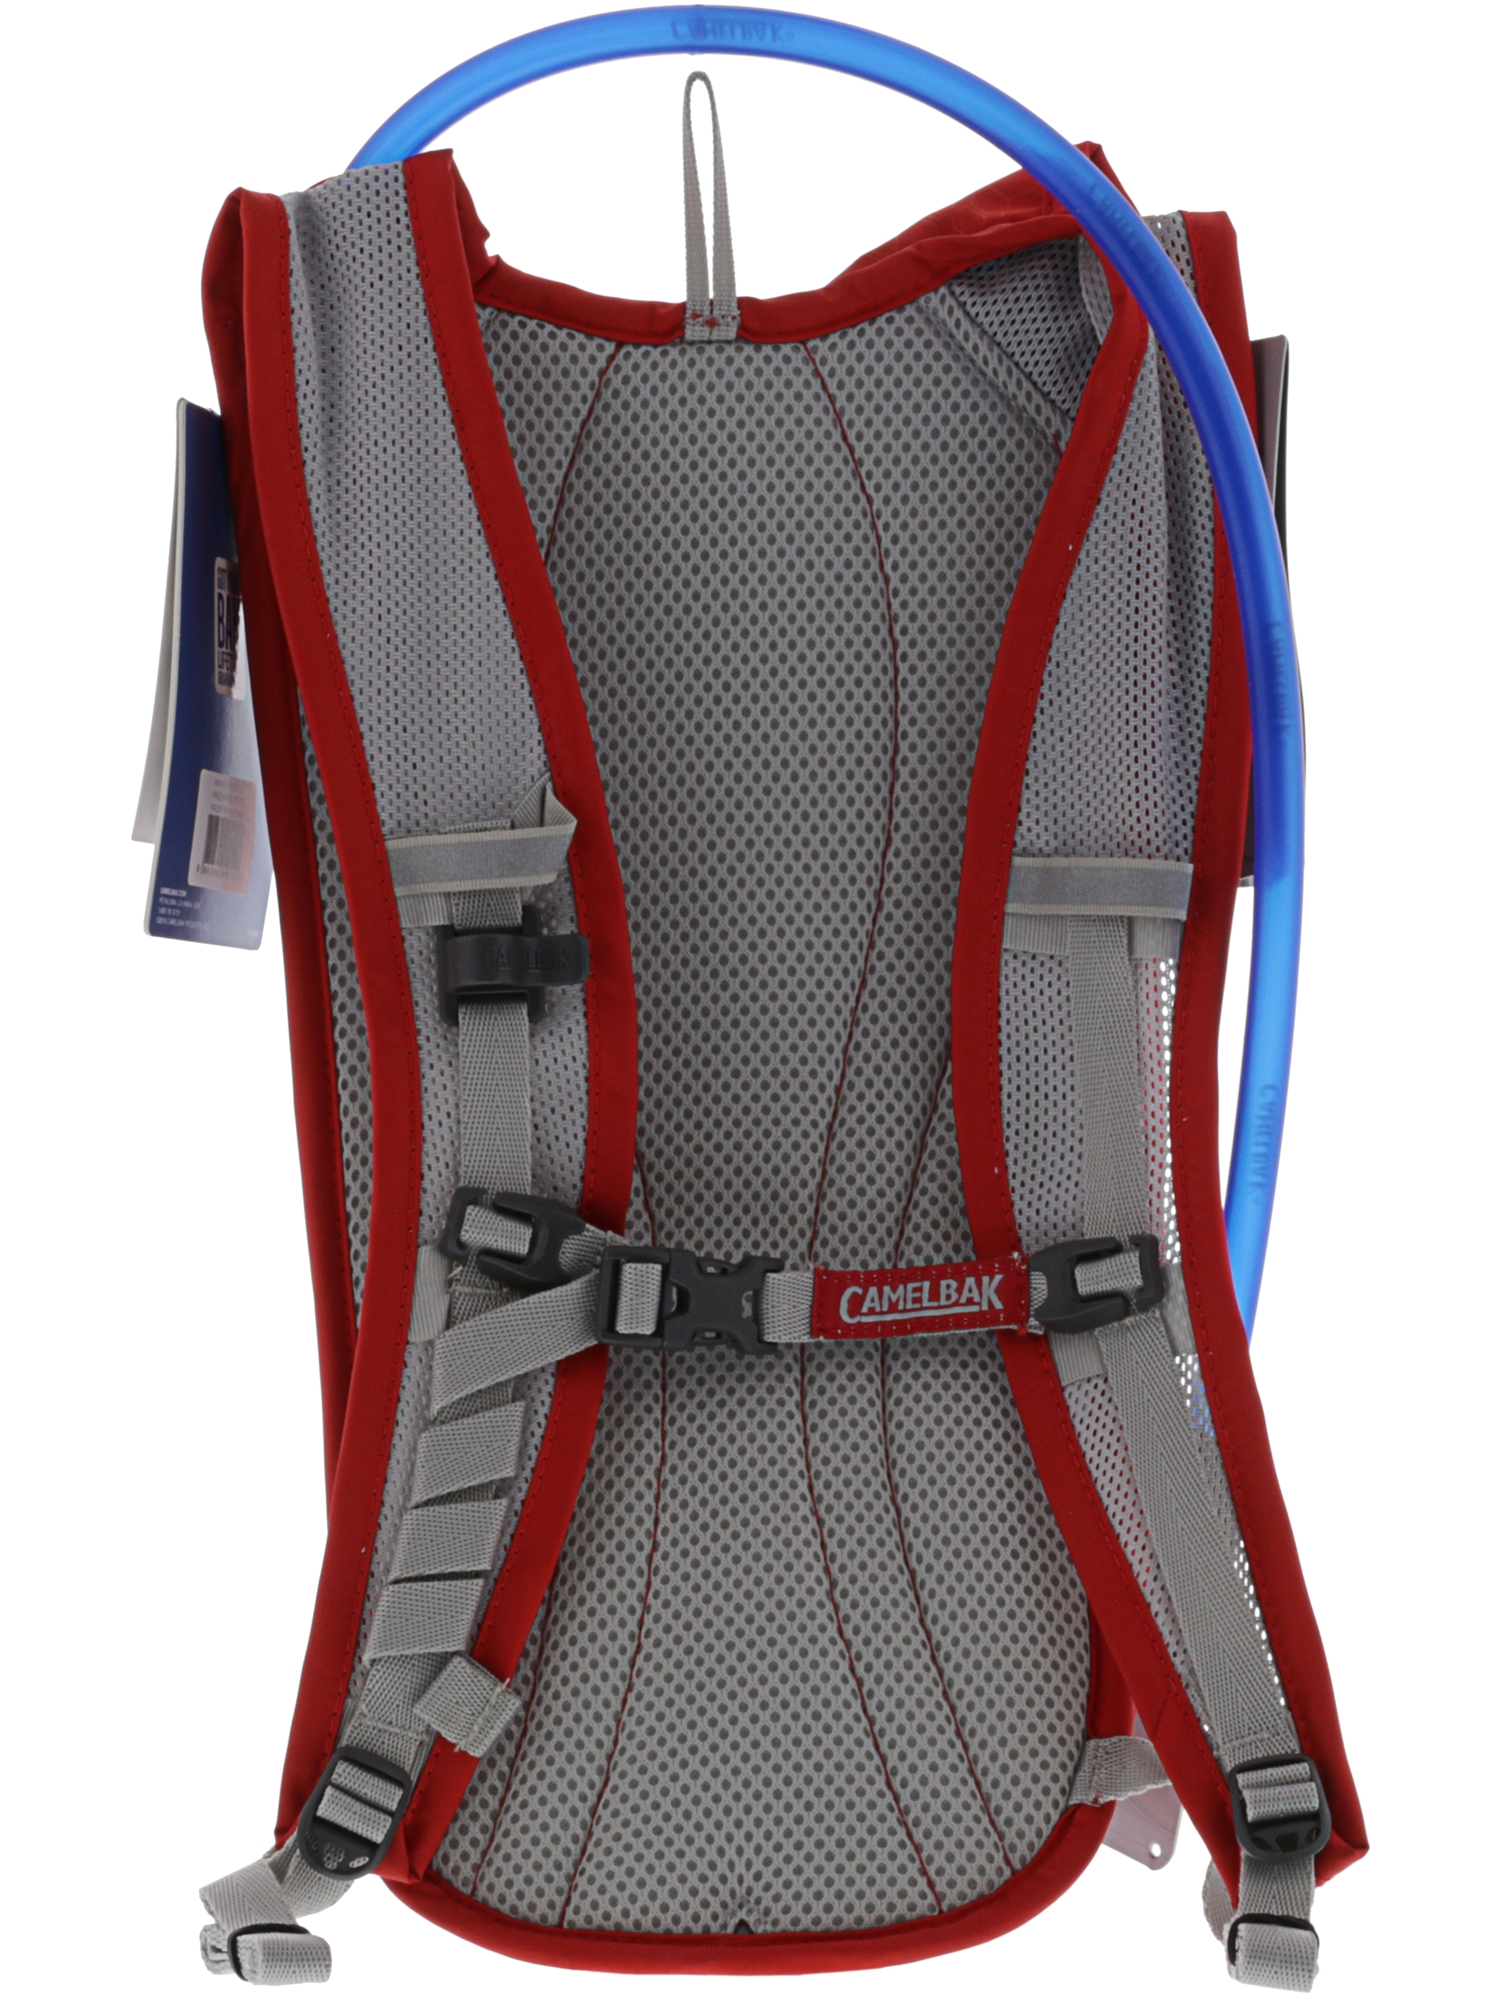 Camelbak Classic Hydration Pack Packs - Racing Red / Silver - image 3 of 3